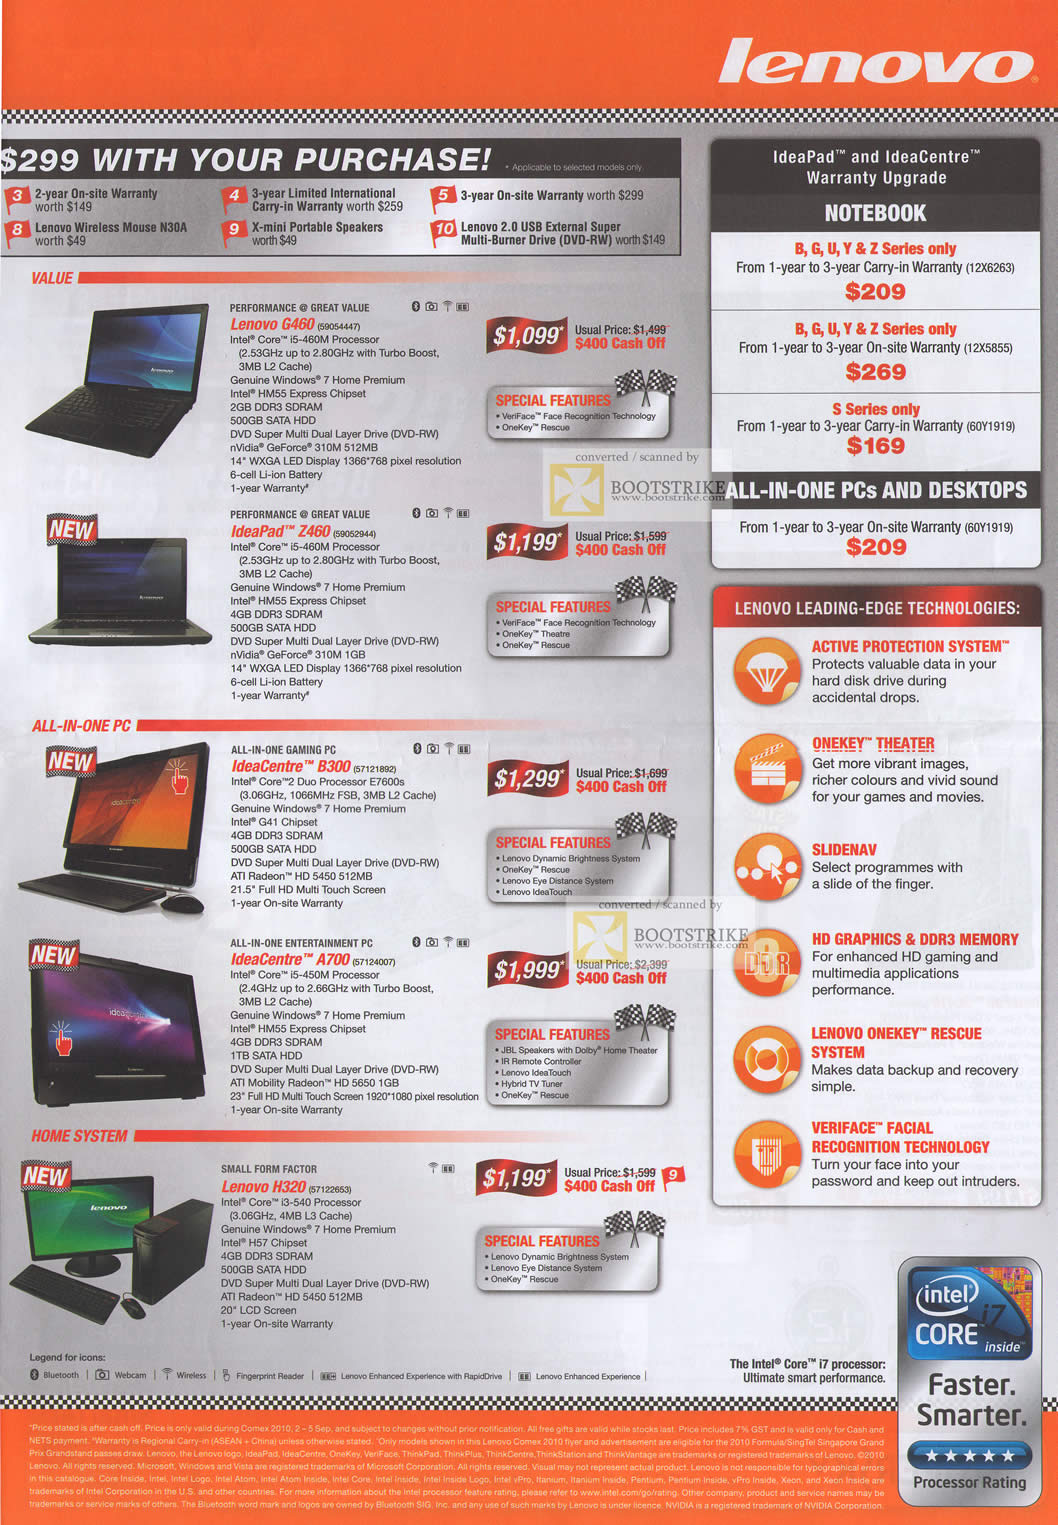 Comex 2010 price list image brochure of Lenovo Notebooks G460 IdeaPad Z460 IdeaCentre B300 A700 H320 Desktop PC All In One